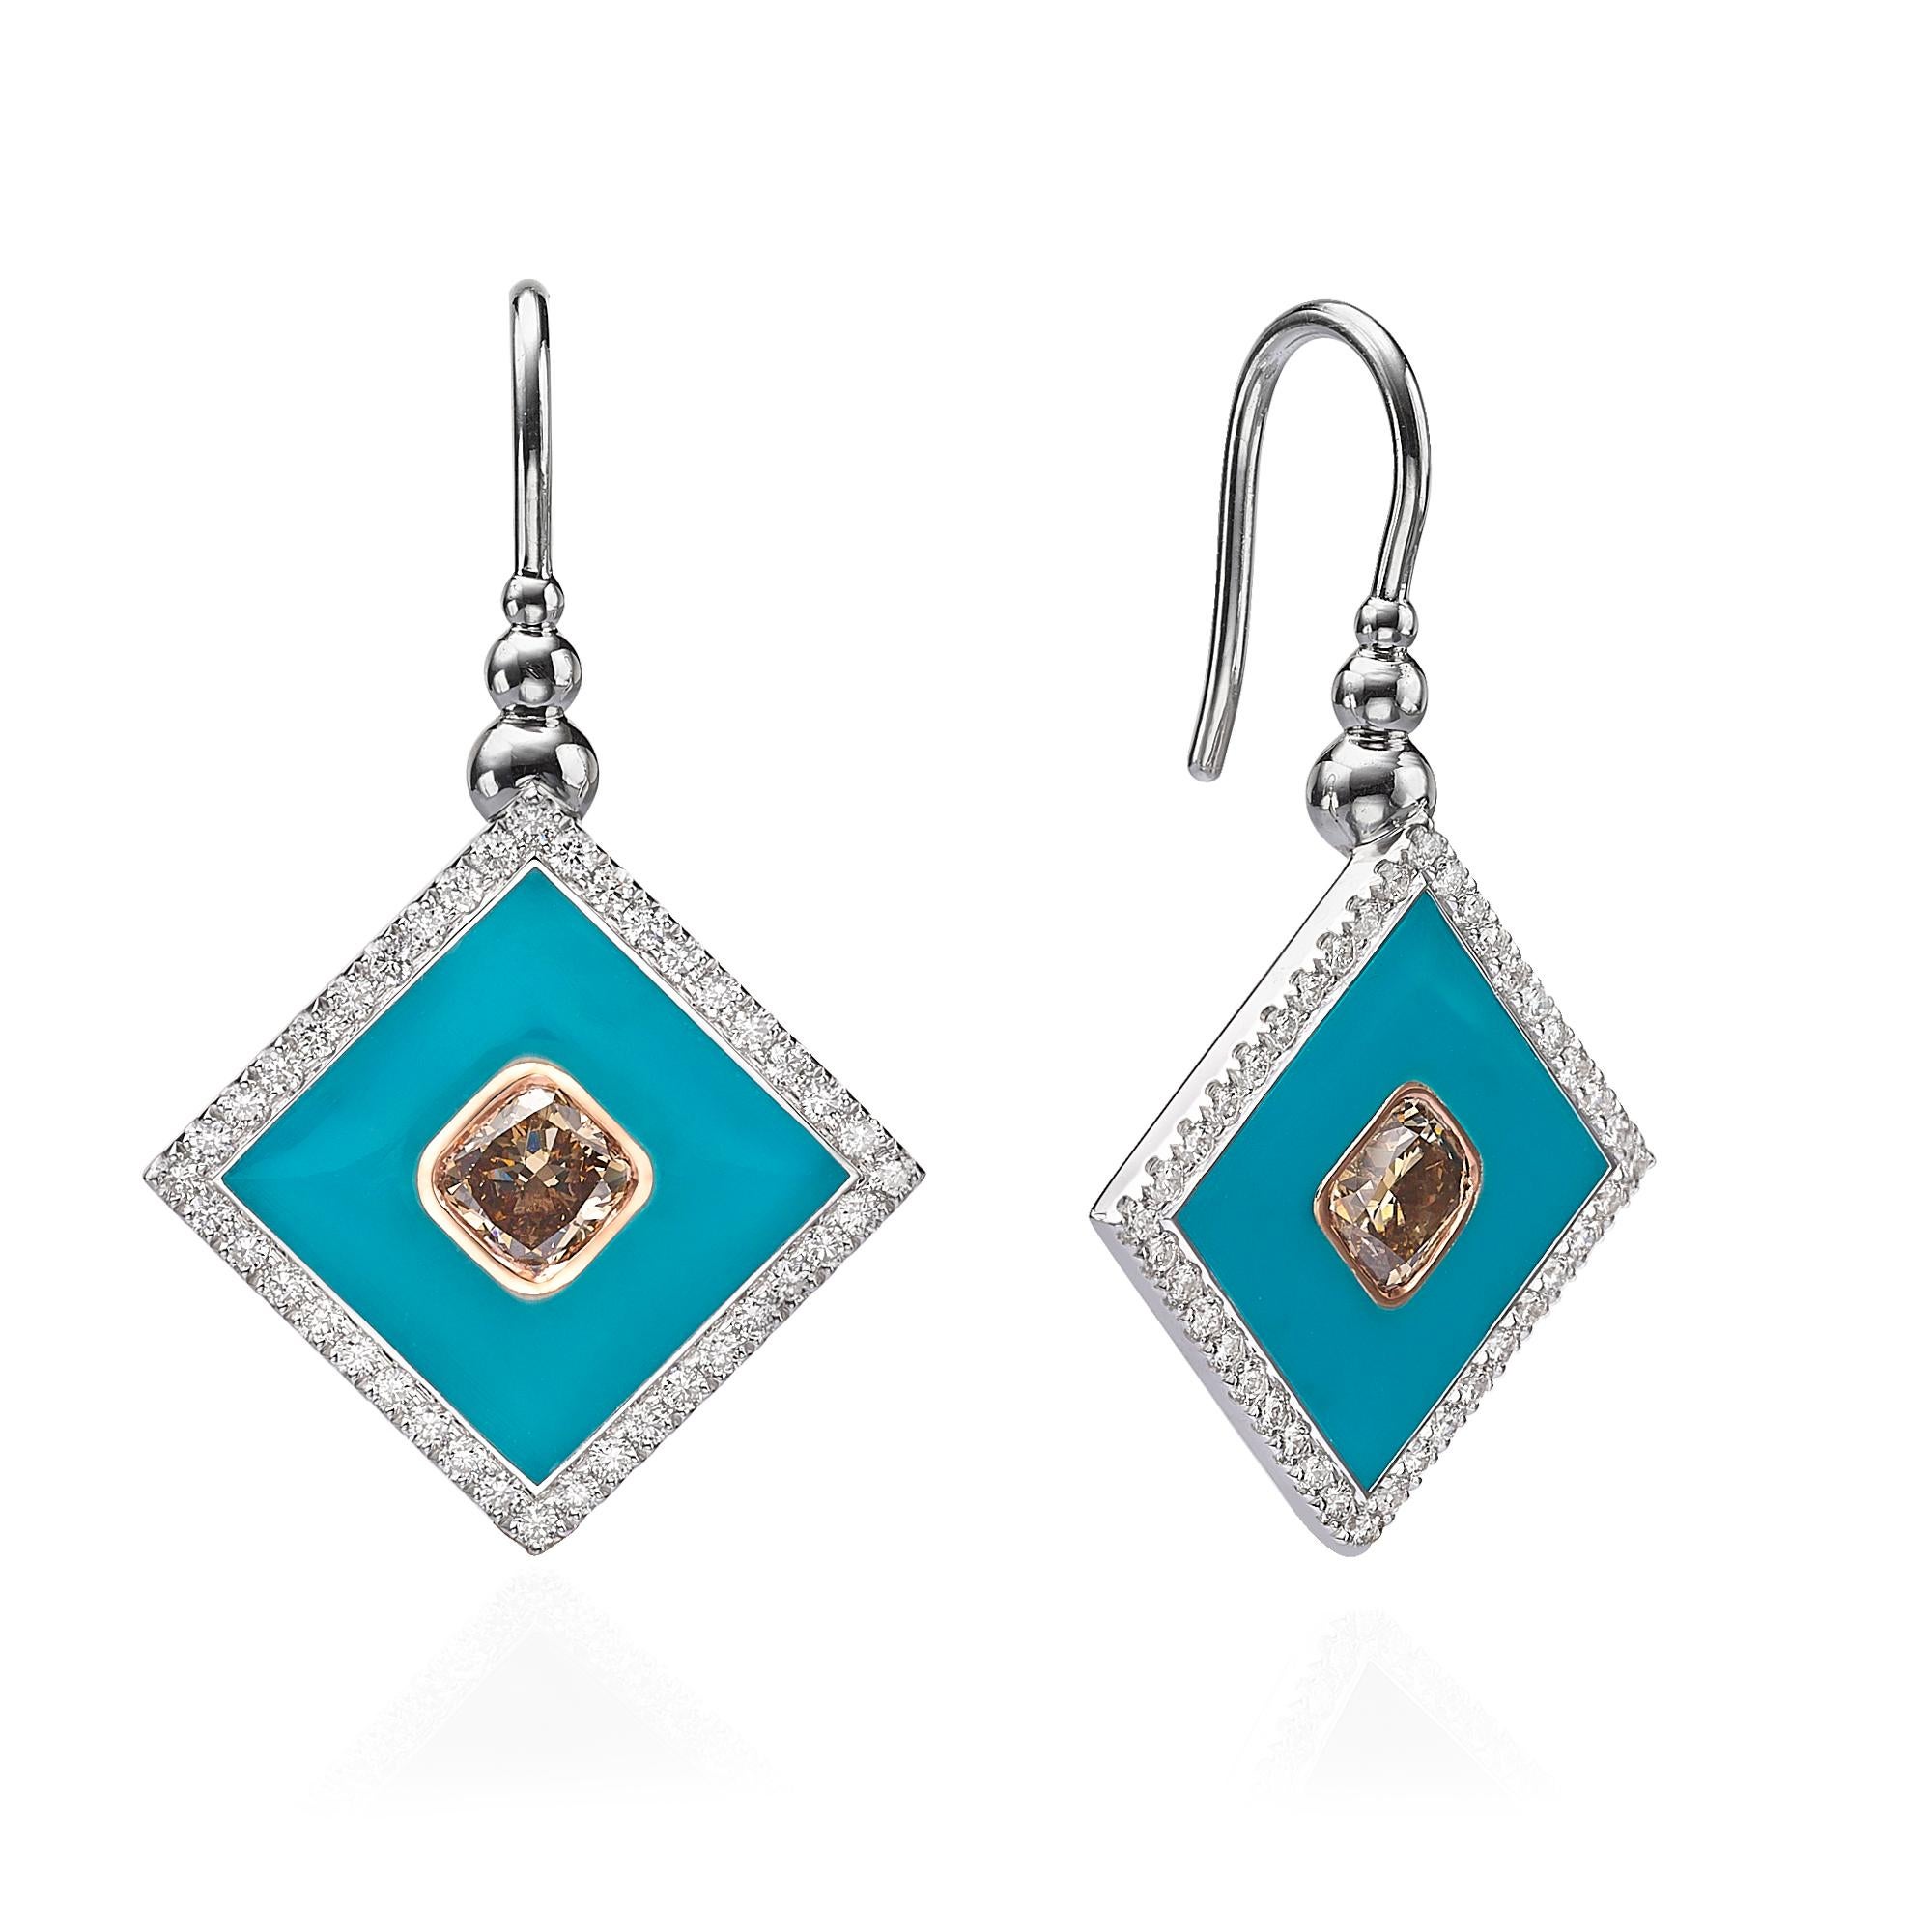 SKU# 4006130

Presenting a beautiful pair of square-shaped 18k white and rose gold diamond earrings with blue enamel. These earrings featuring captivating cushion-cut fancy orangy brown center stones framed by lustrous rose gold.

The center stones